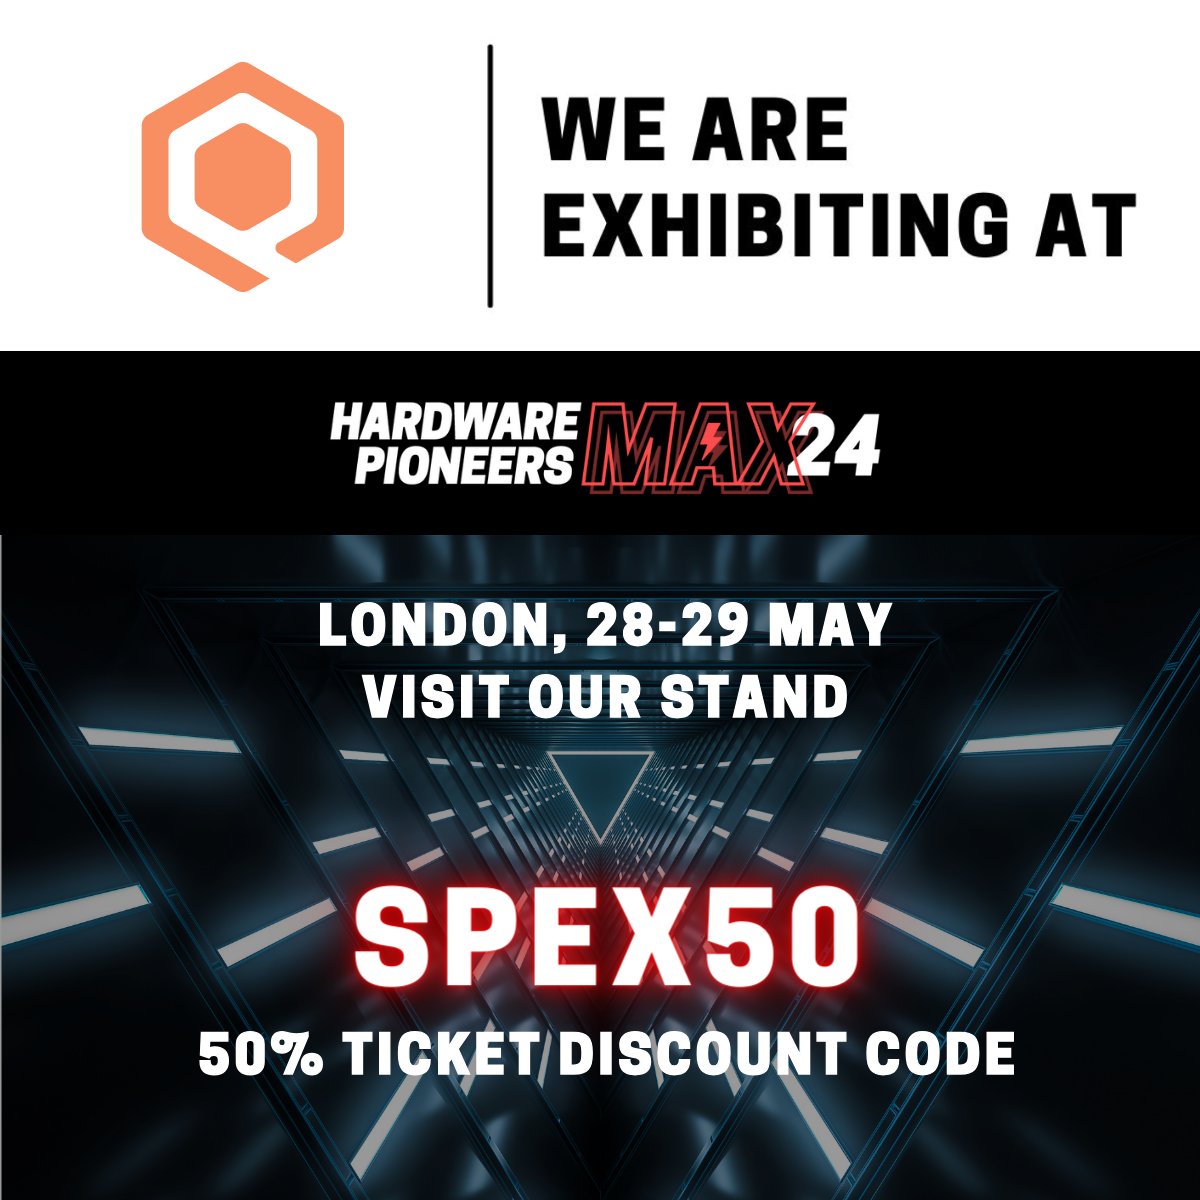 🤝Meet us in London at Hardware Pioneers Max!

On May 28th and 29th, we will demonstrate our platform, including new Analytics features.

📅 May 28-29th
🌍 The Business Design Centre (BDC), London
📍 Booth GF2

🔗Register to join: link.hardwarepioneers.com/spex24

#HWPmax24 #Qubitro #IoT